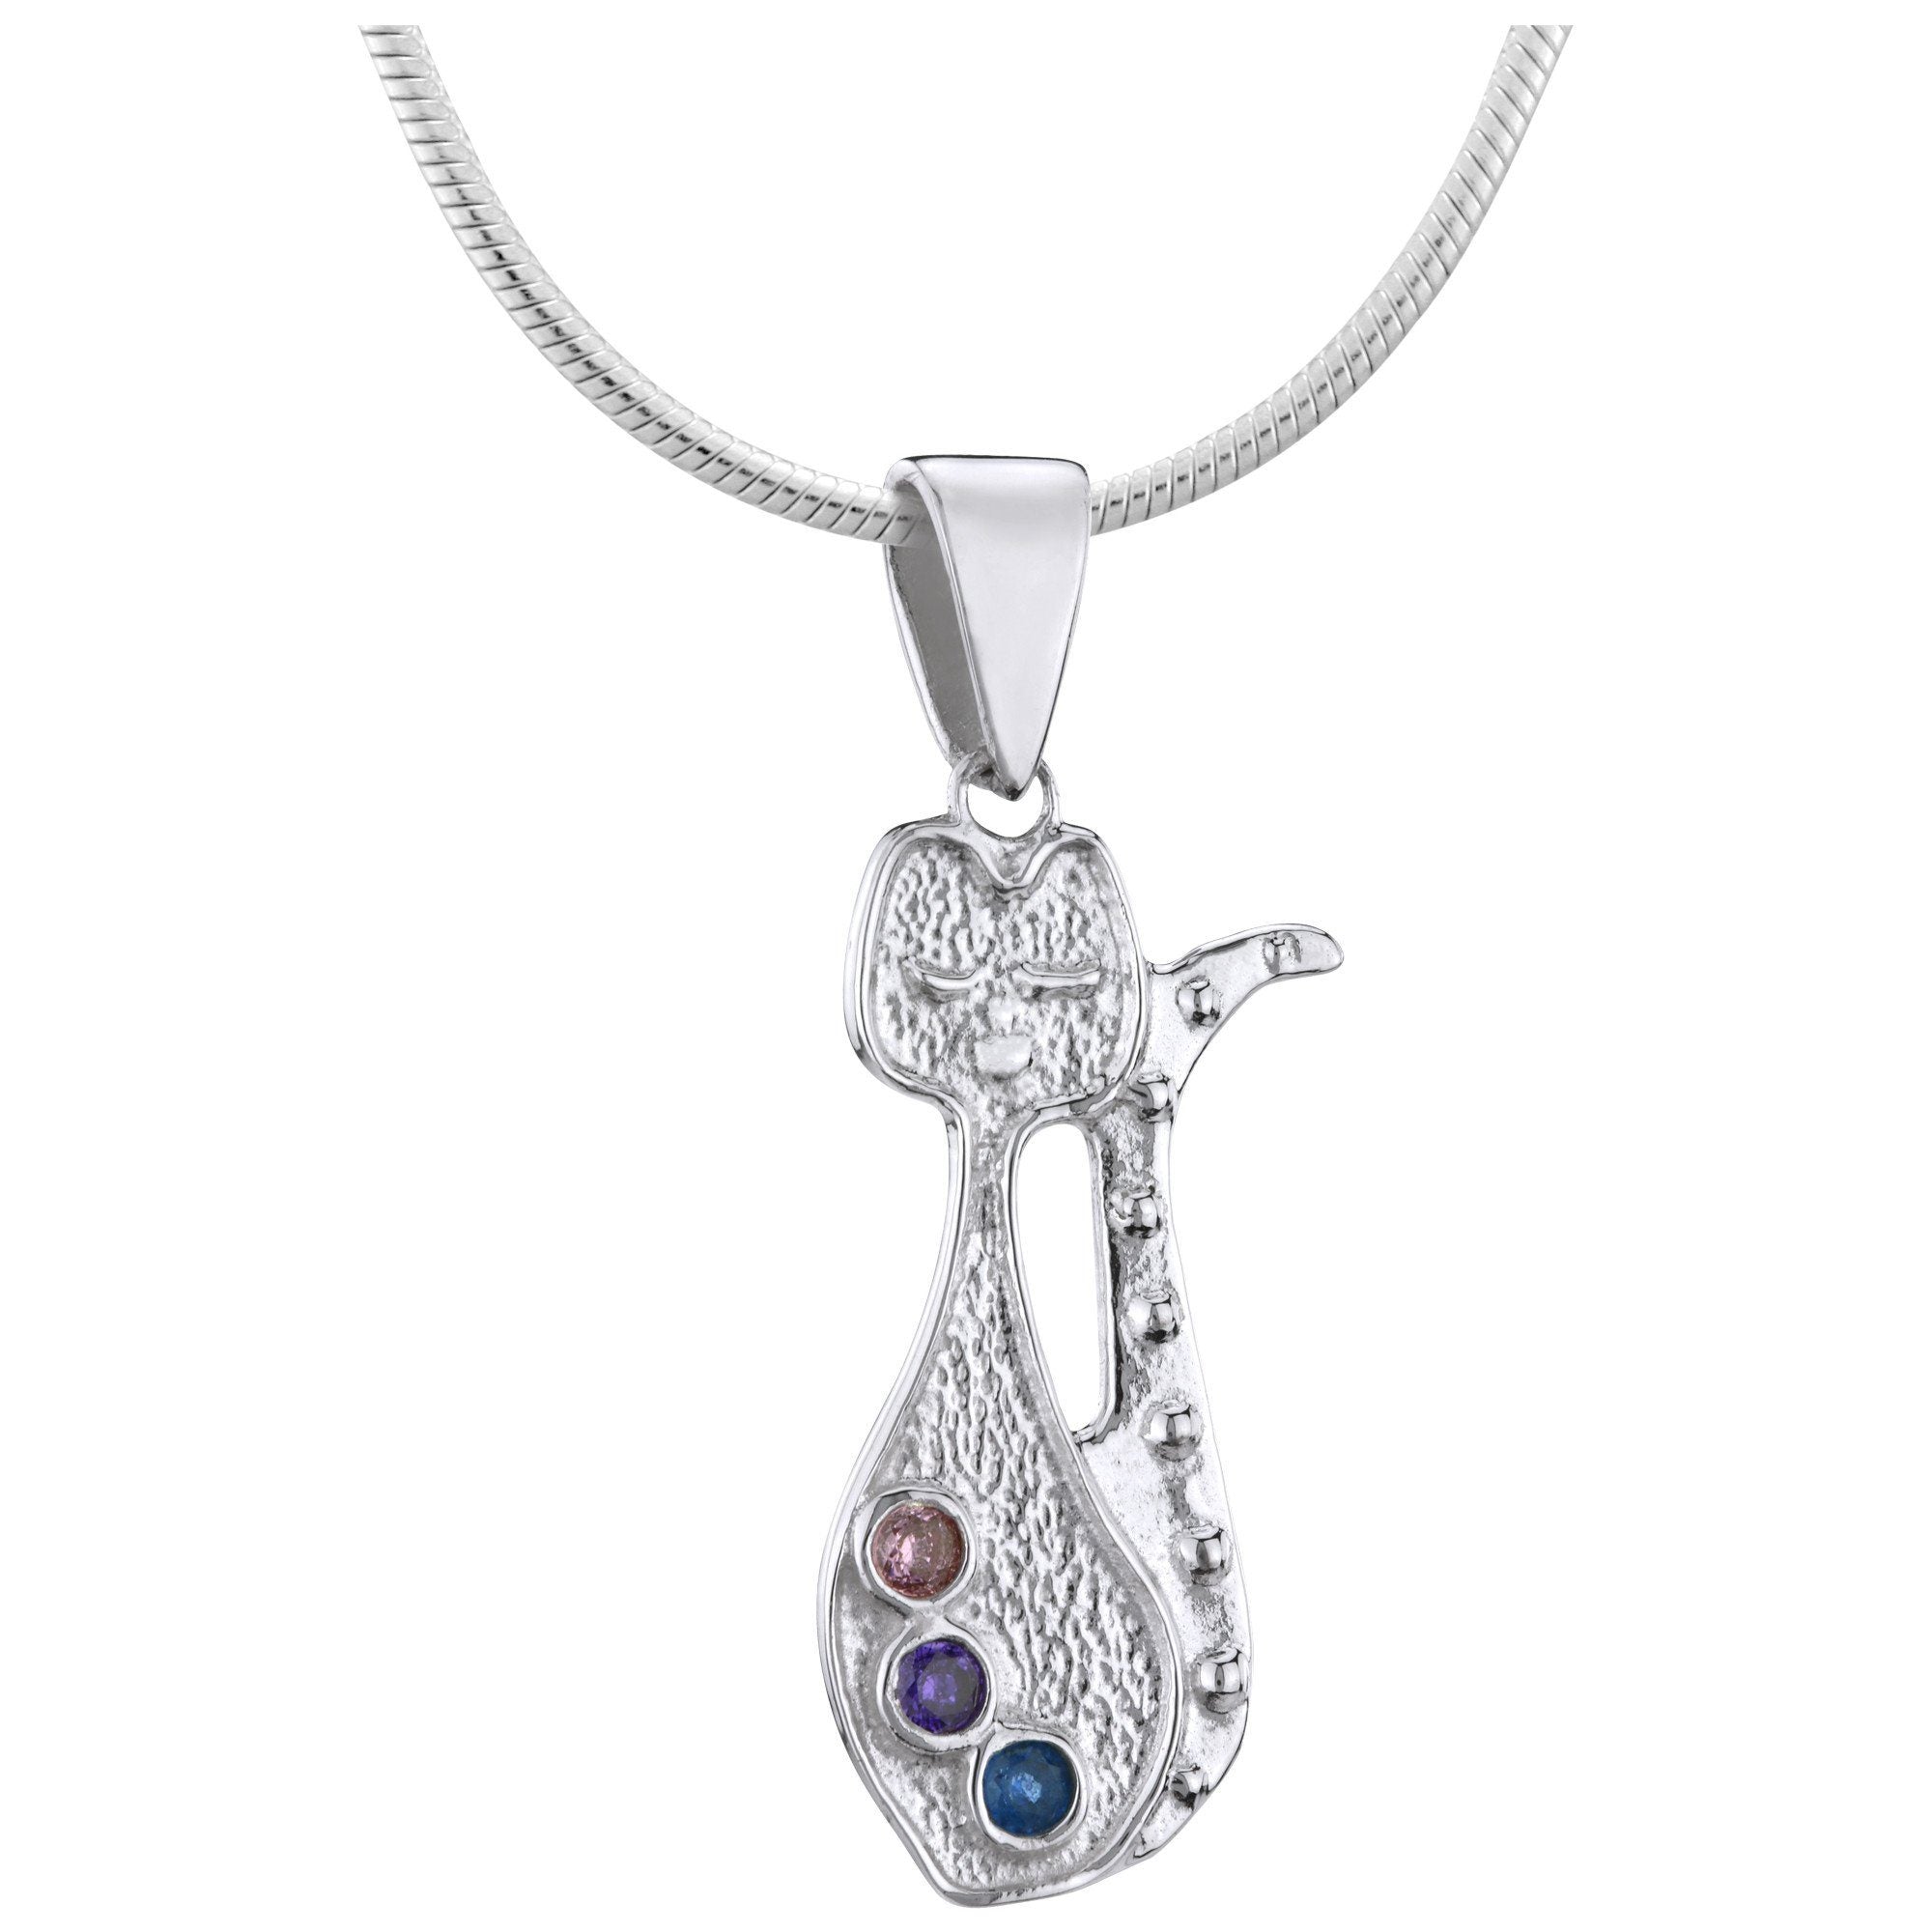 Fancy Cat Sterling Necklace - Pendant Only